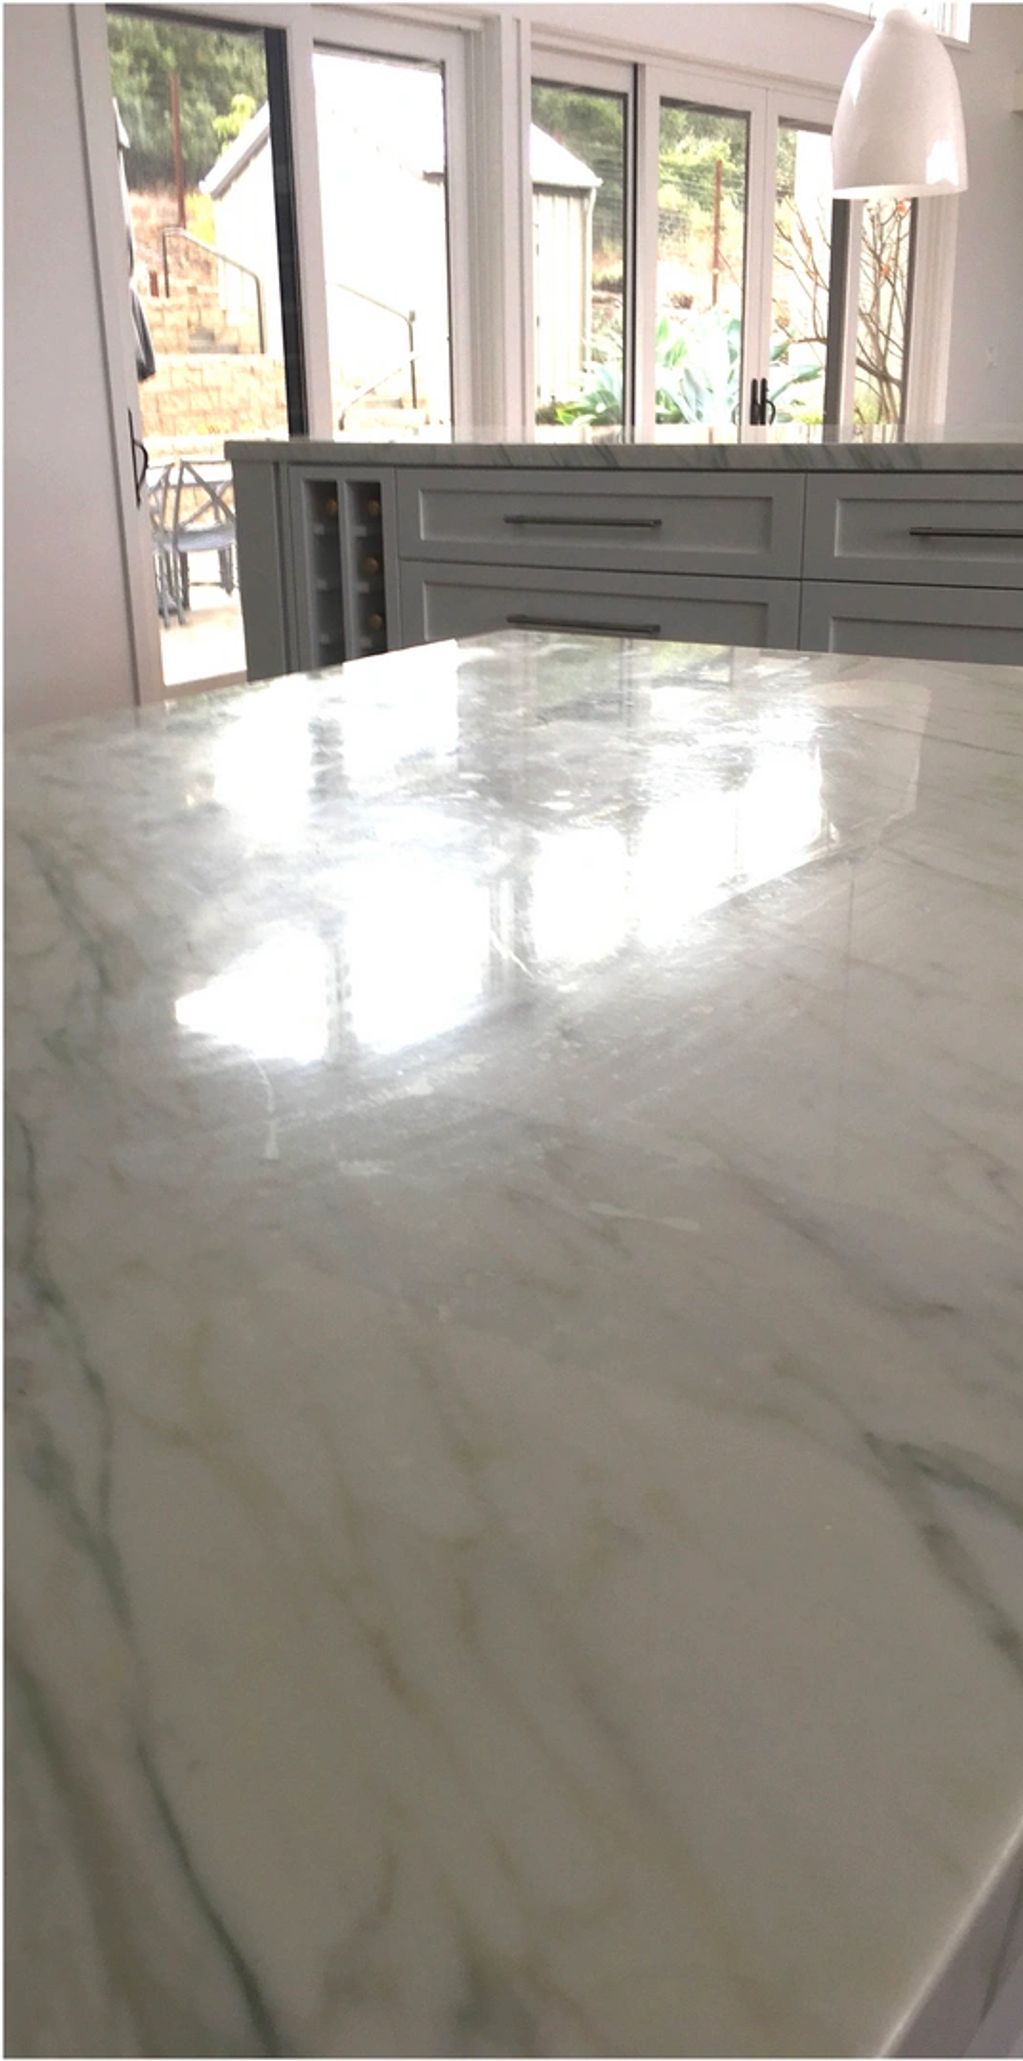 Marble counter top with scratches and etch marks